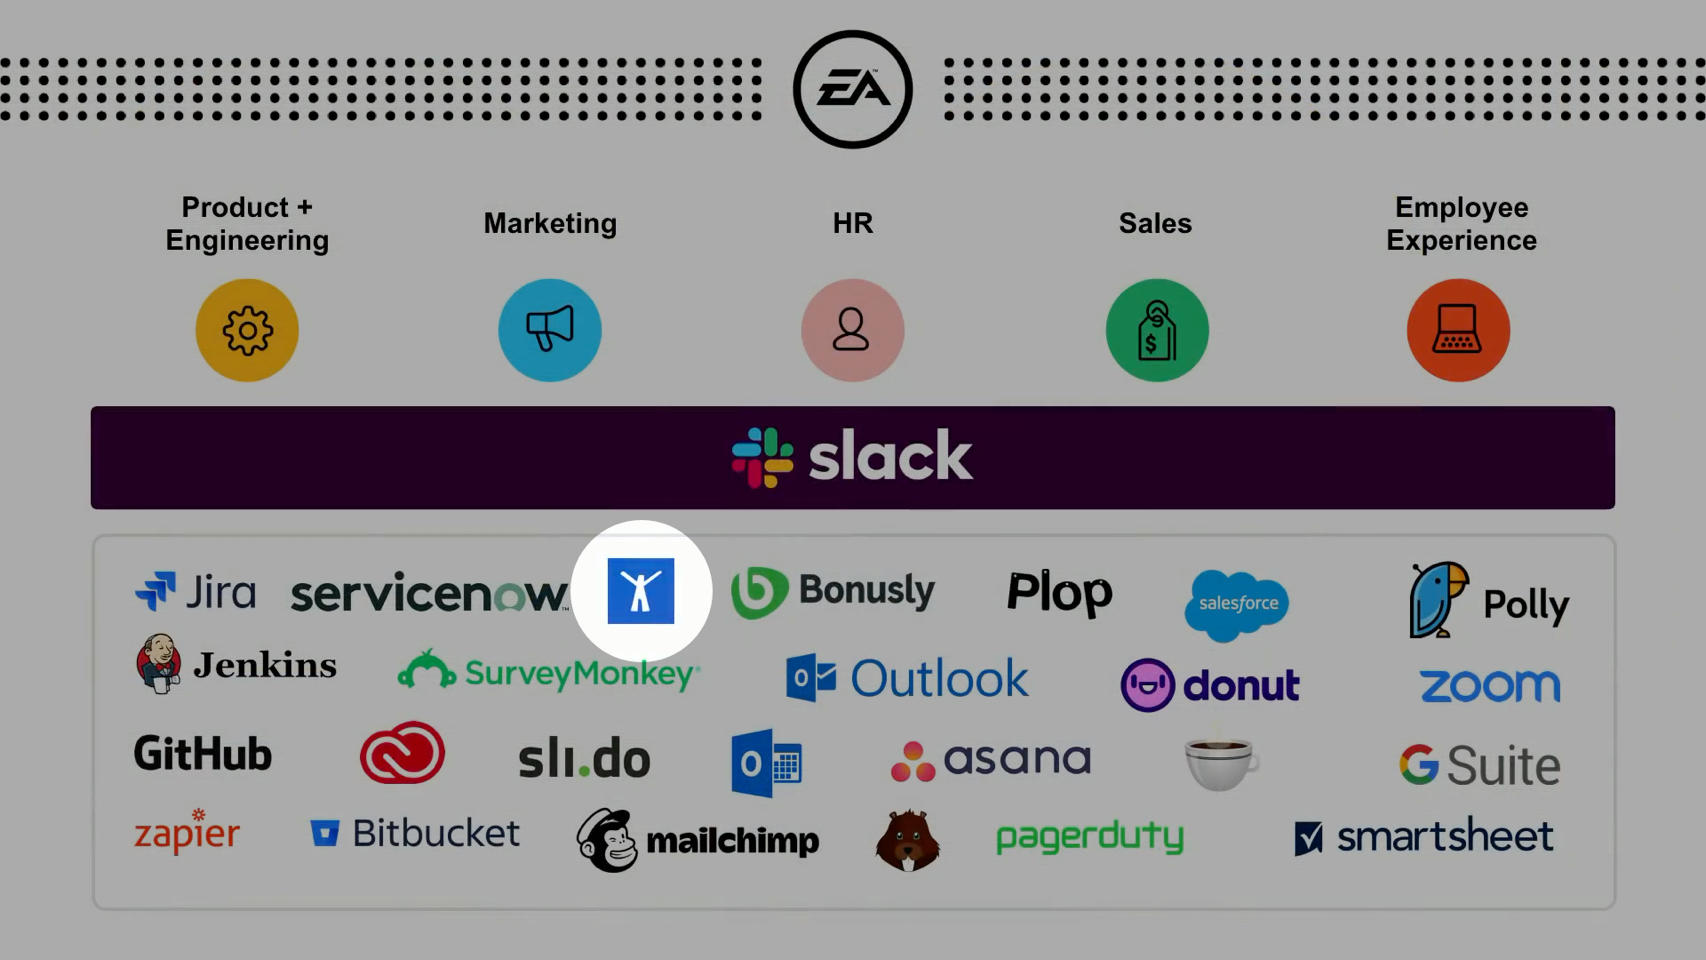 Slide from Slack’s 2019 Frontiers conference keynote presentation where GreetBot was featured